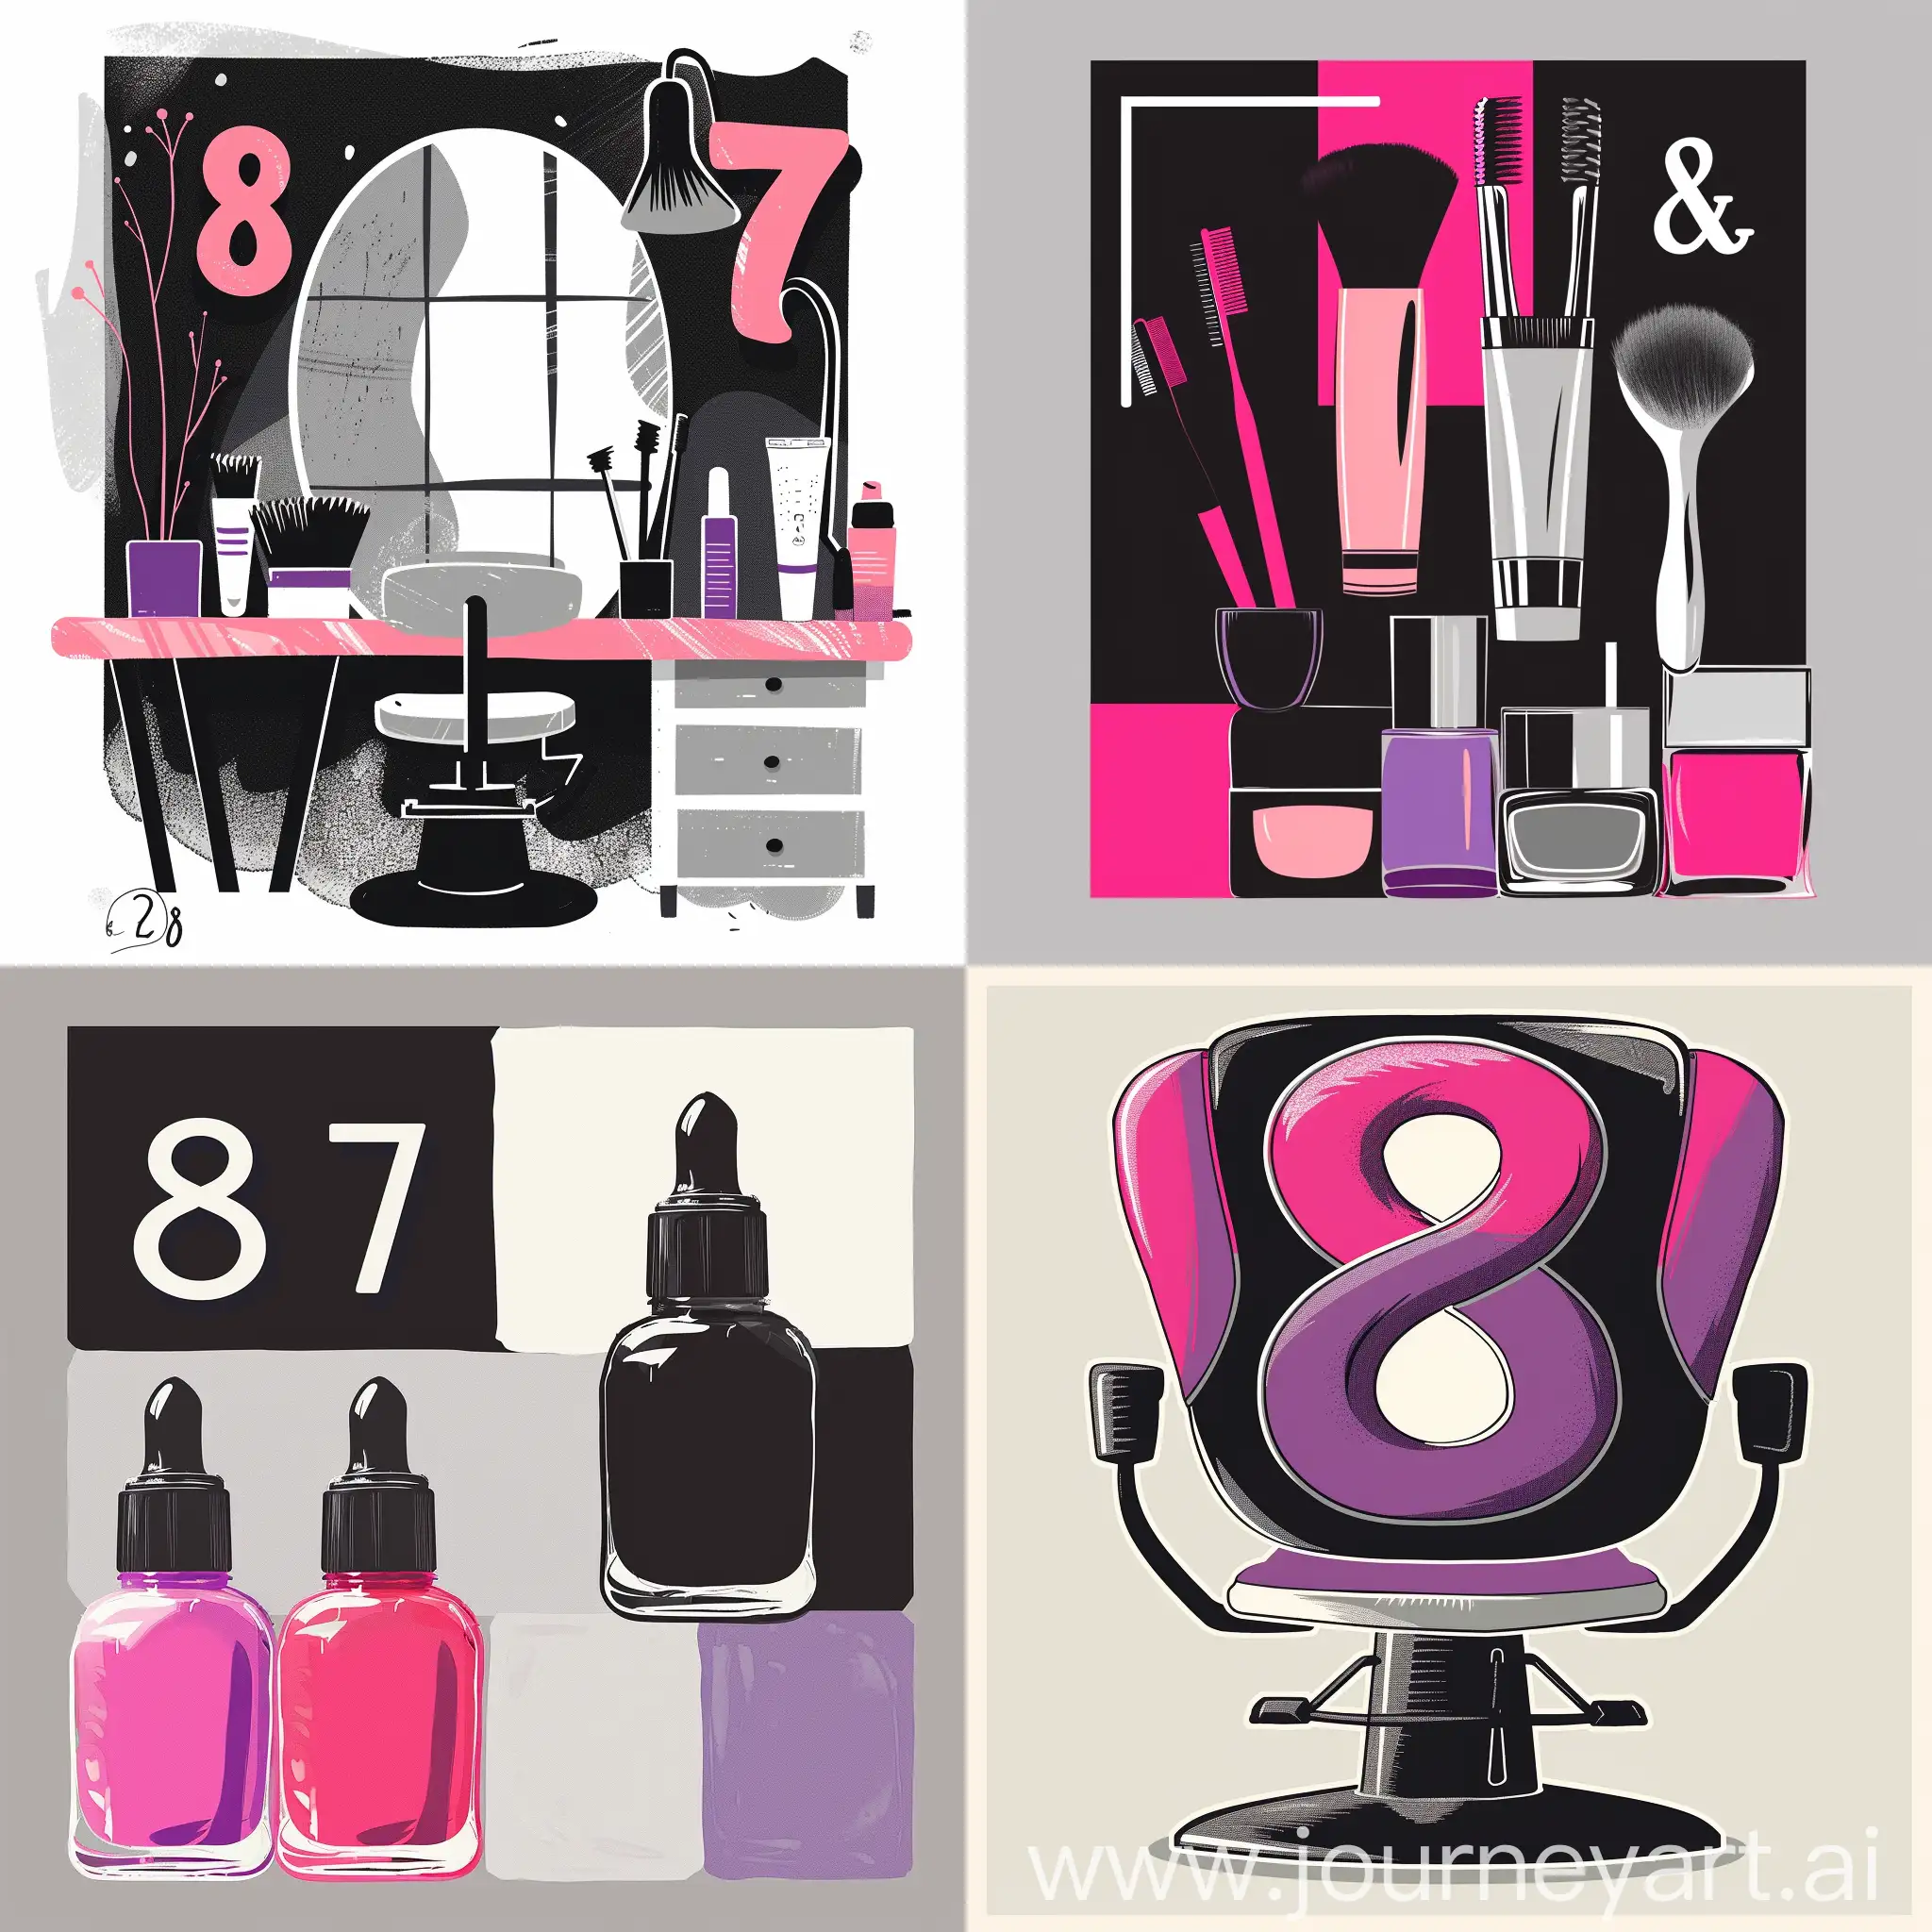 Elegant-March-8th-Beauty-Salon-Celebration-with-Black-Bright-Pink-and-Purple-Tones